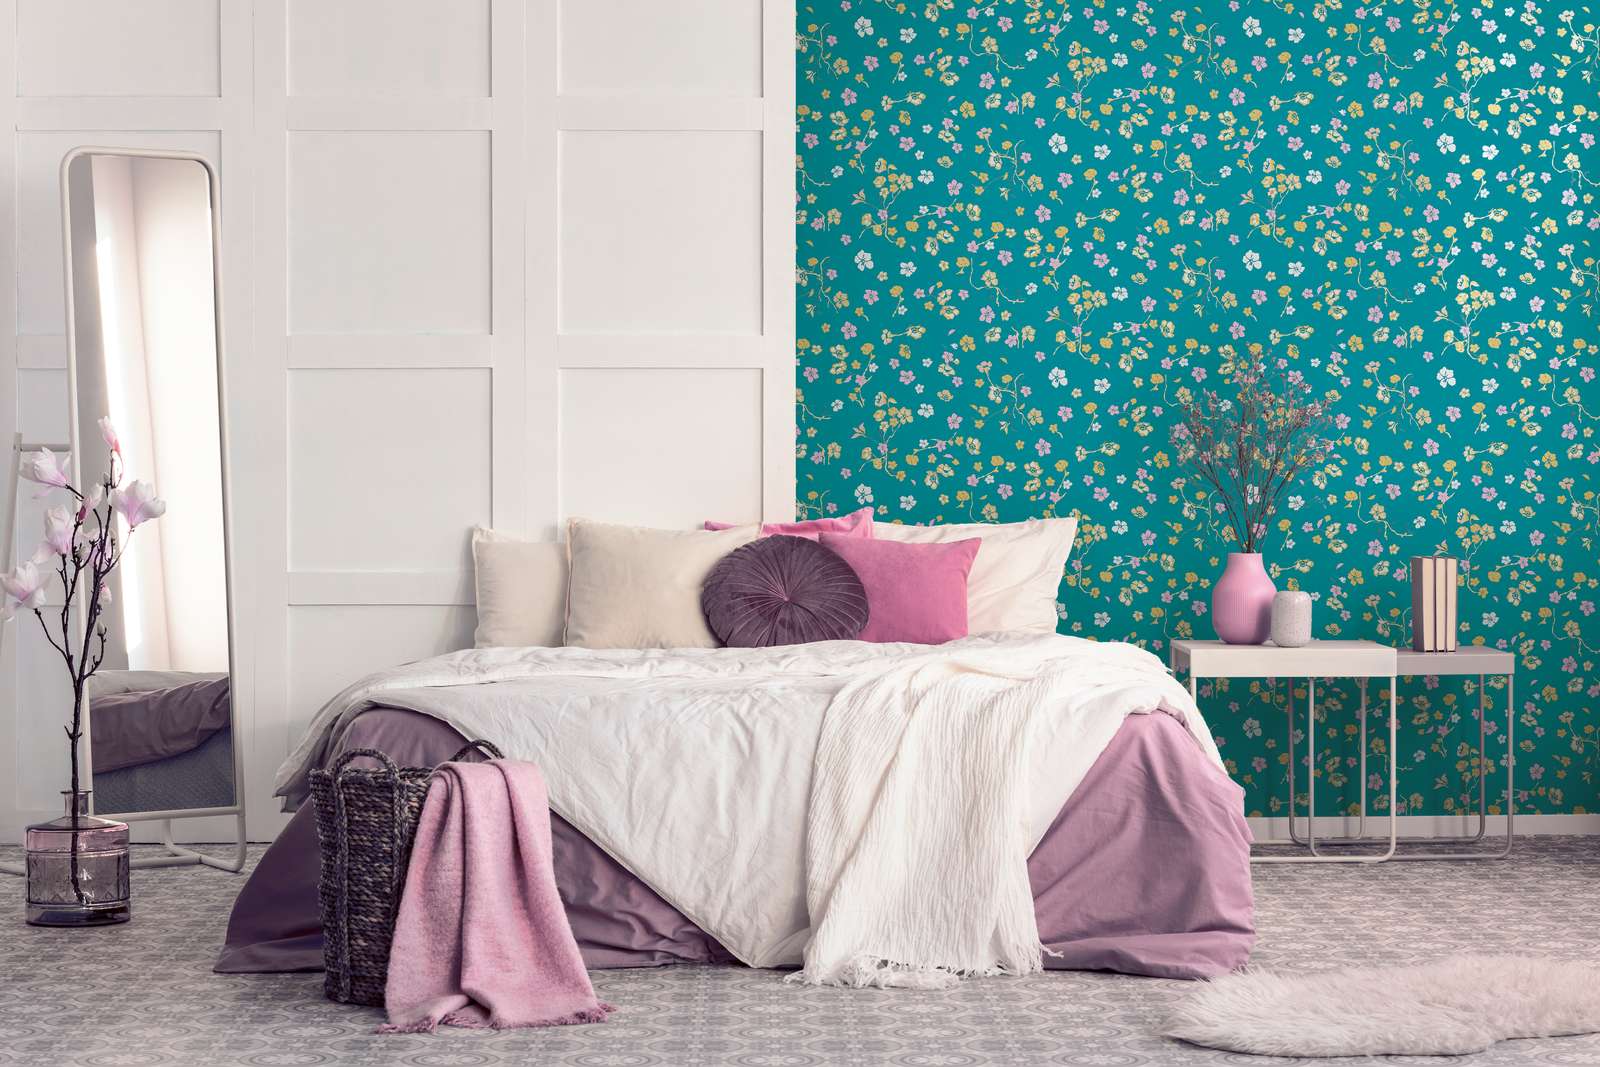             Floral wallpaper in country style with gloss - turquoise, yellow, pink
        